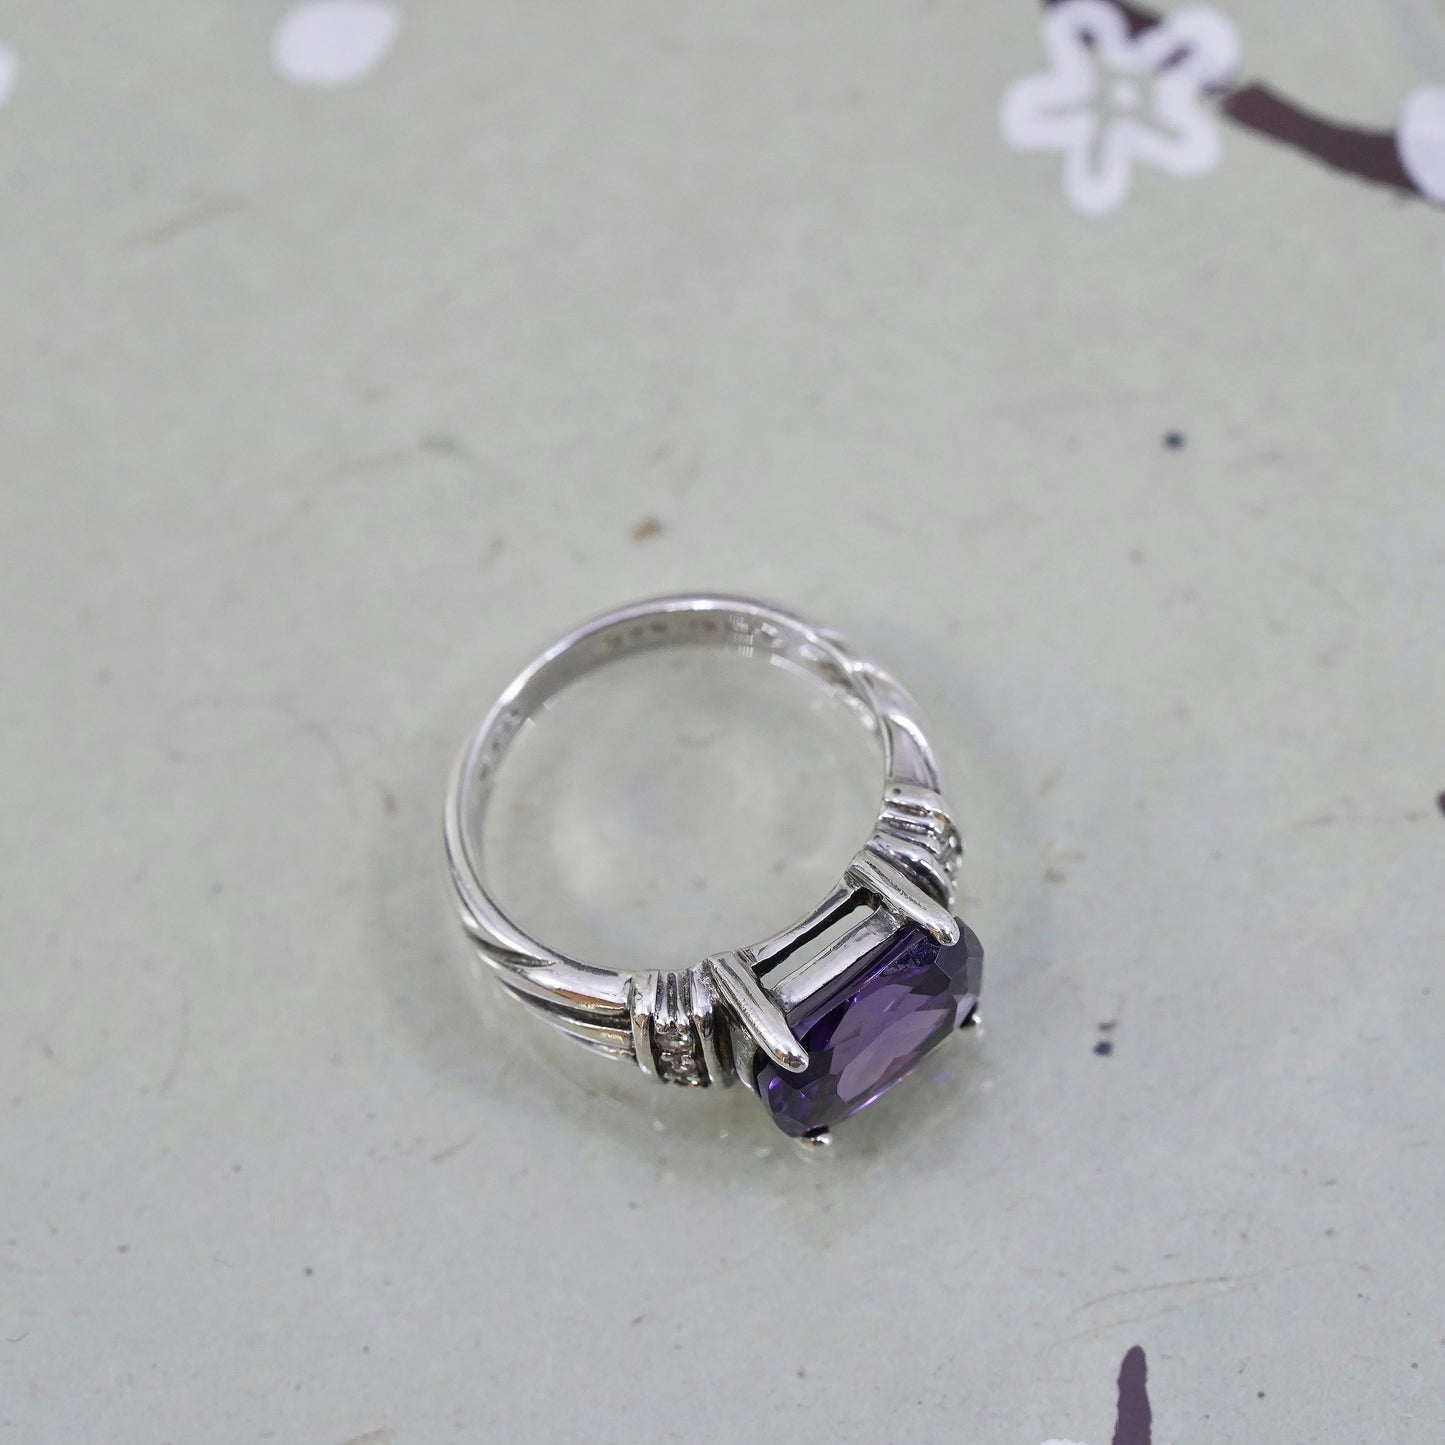 Size 5, vintage Sterling silver handmade ring, 925 with amethyst and Cz around